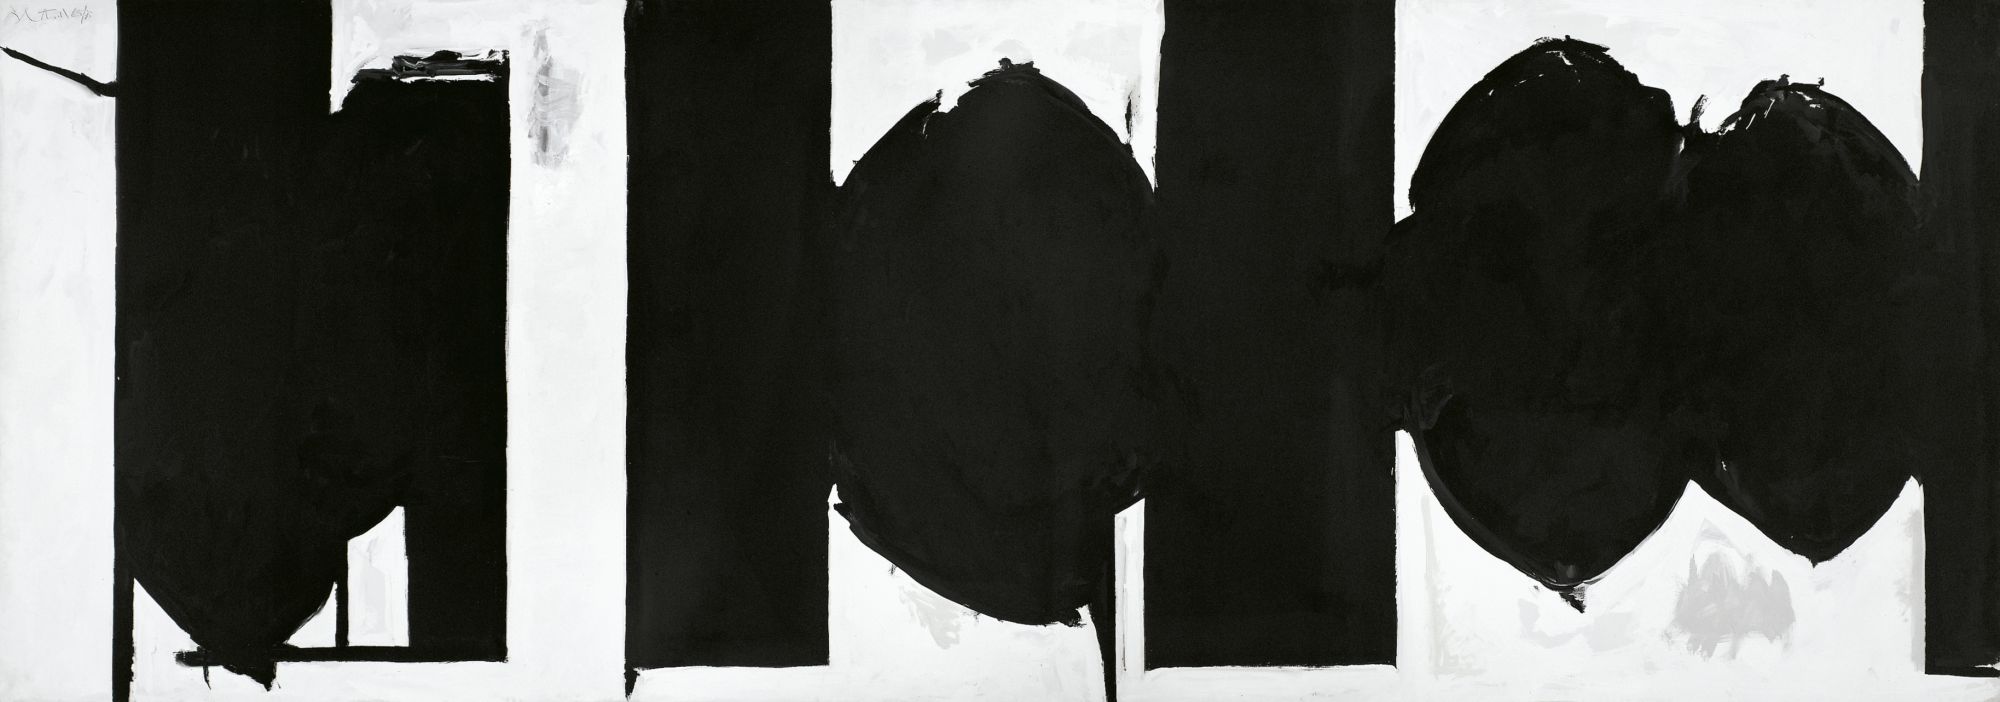 Elegy to the Spanish Republic No. 100, 1962–1963/1973–1975. Oil on canvas, 84 x 240 inches (213.4 x 609.6 cm)